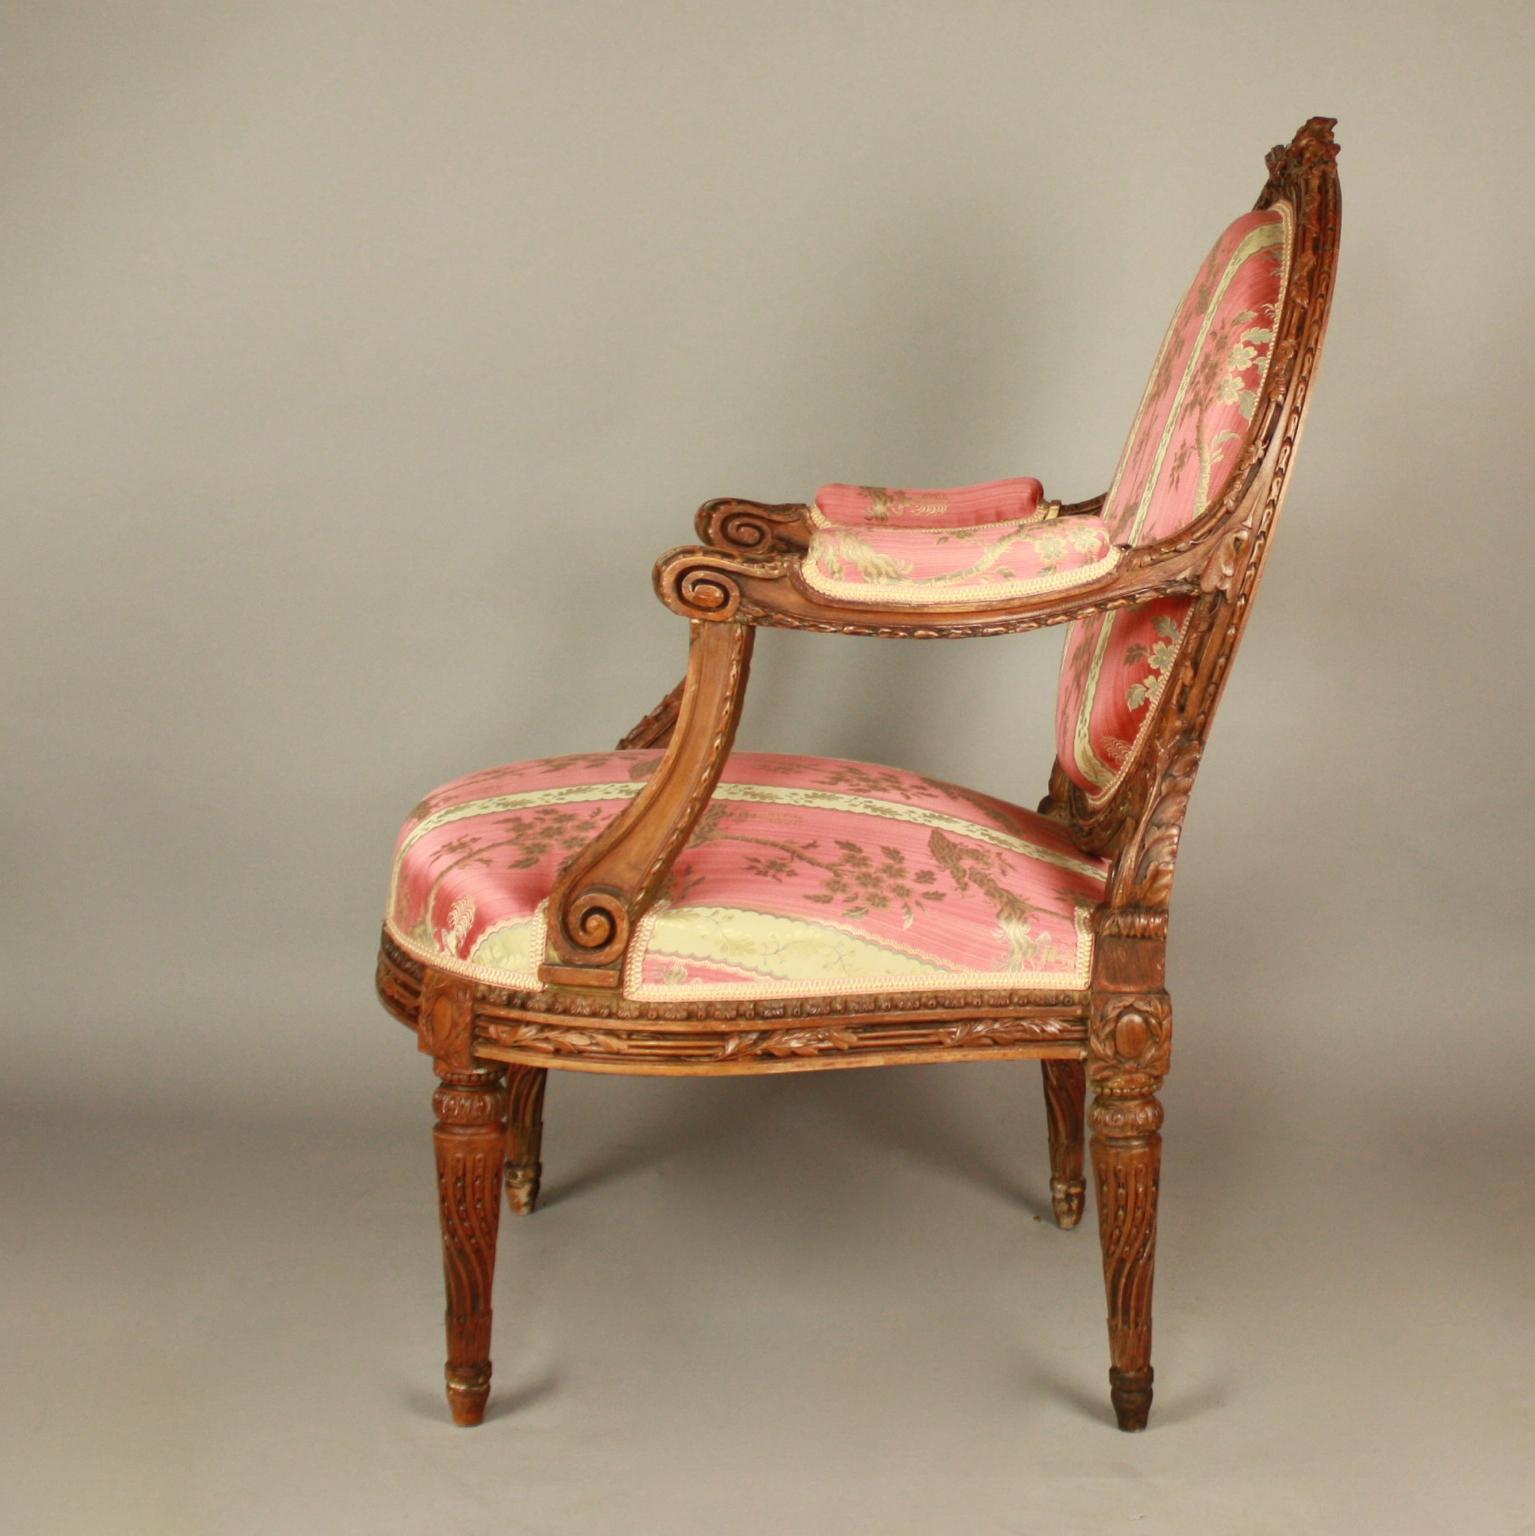 19th Century Pair of 19th Ct. Louis XVI Style Walnut Fauteuils or Armchairs after J.-R. Nadal